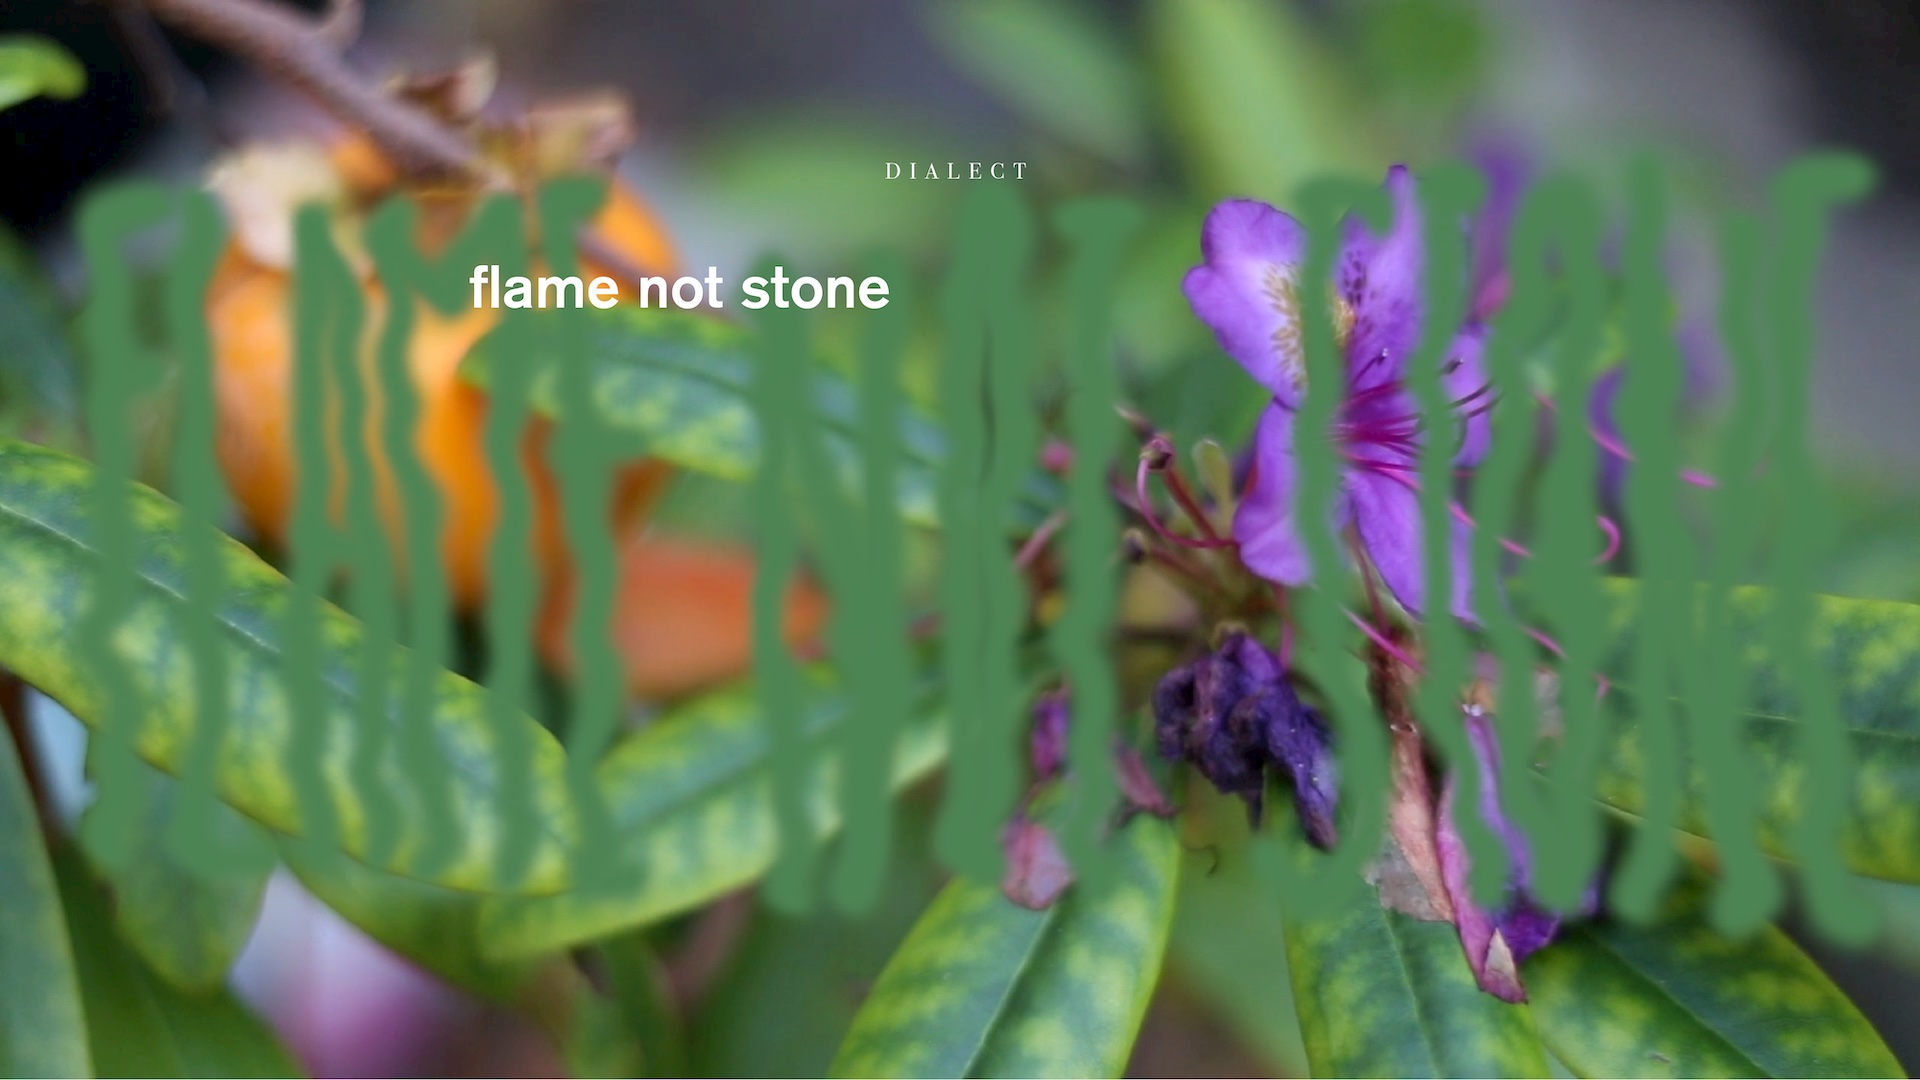 Link to Video for Dialect – Flame Not Stone